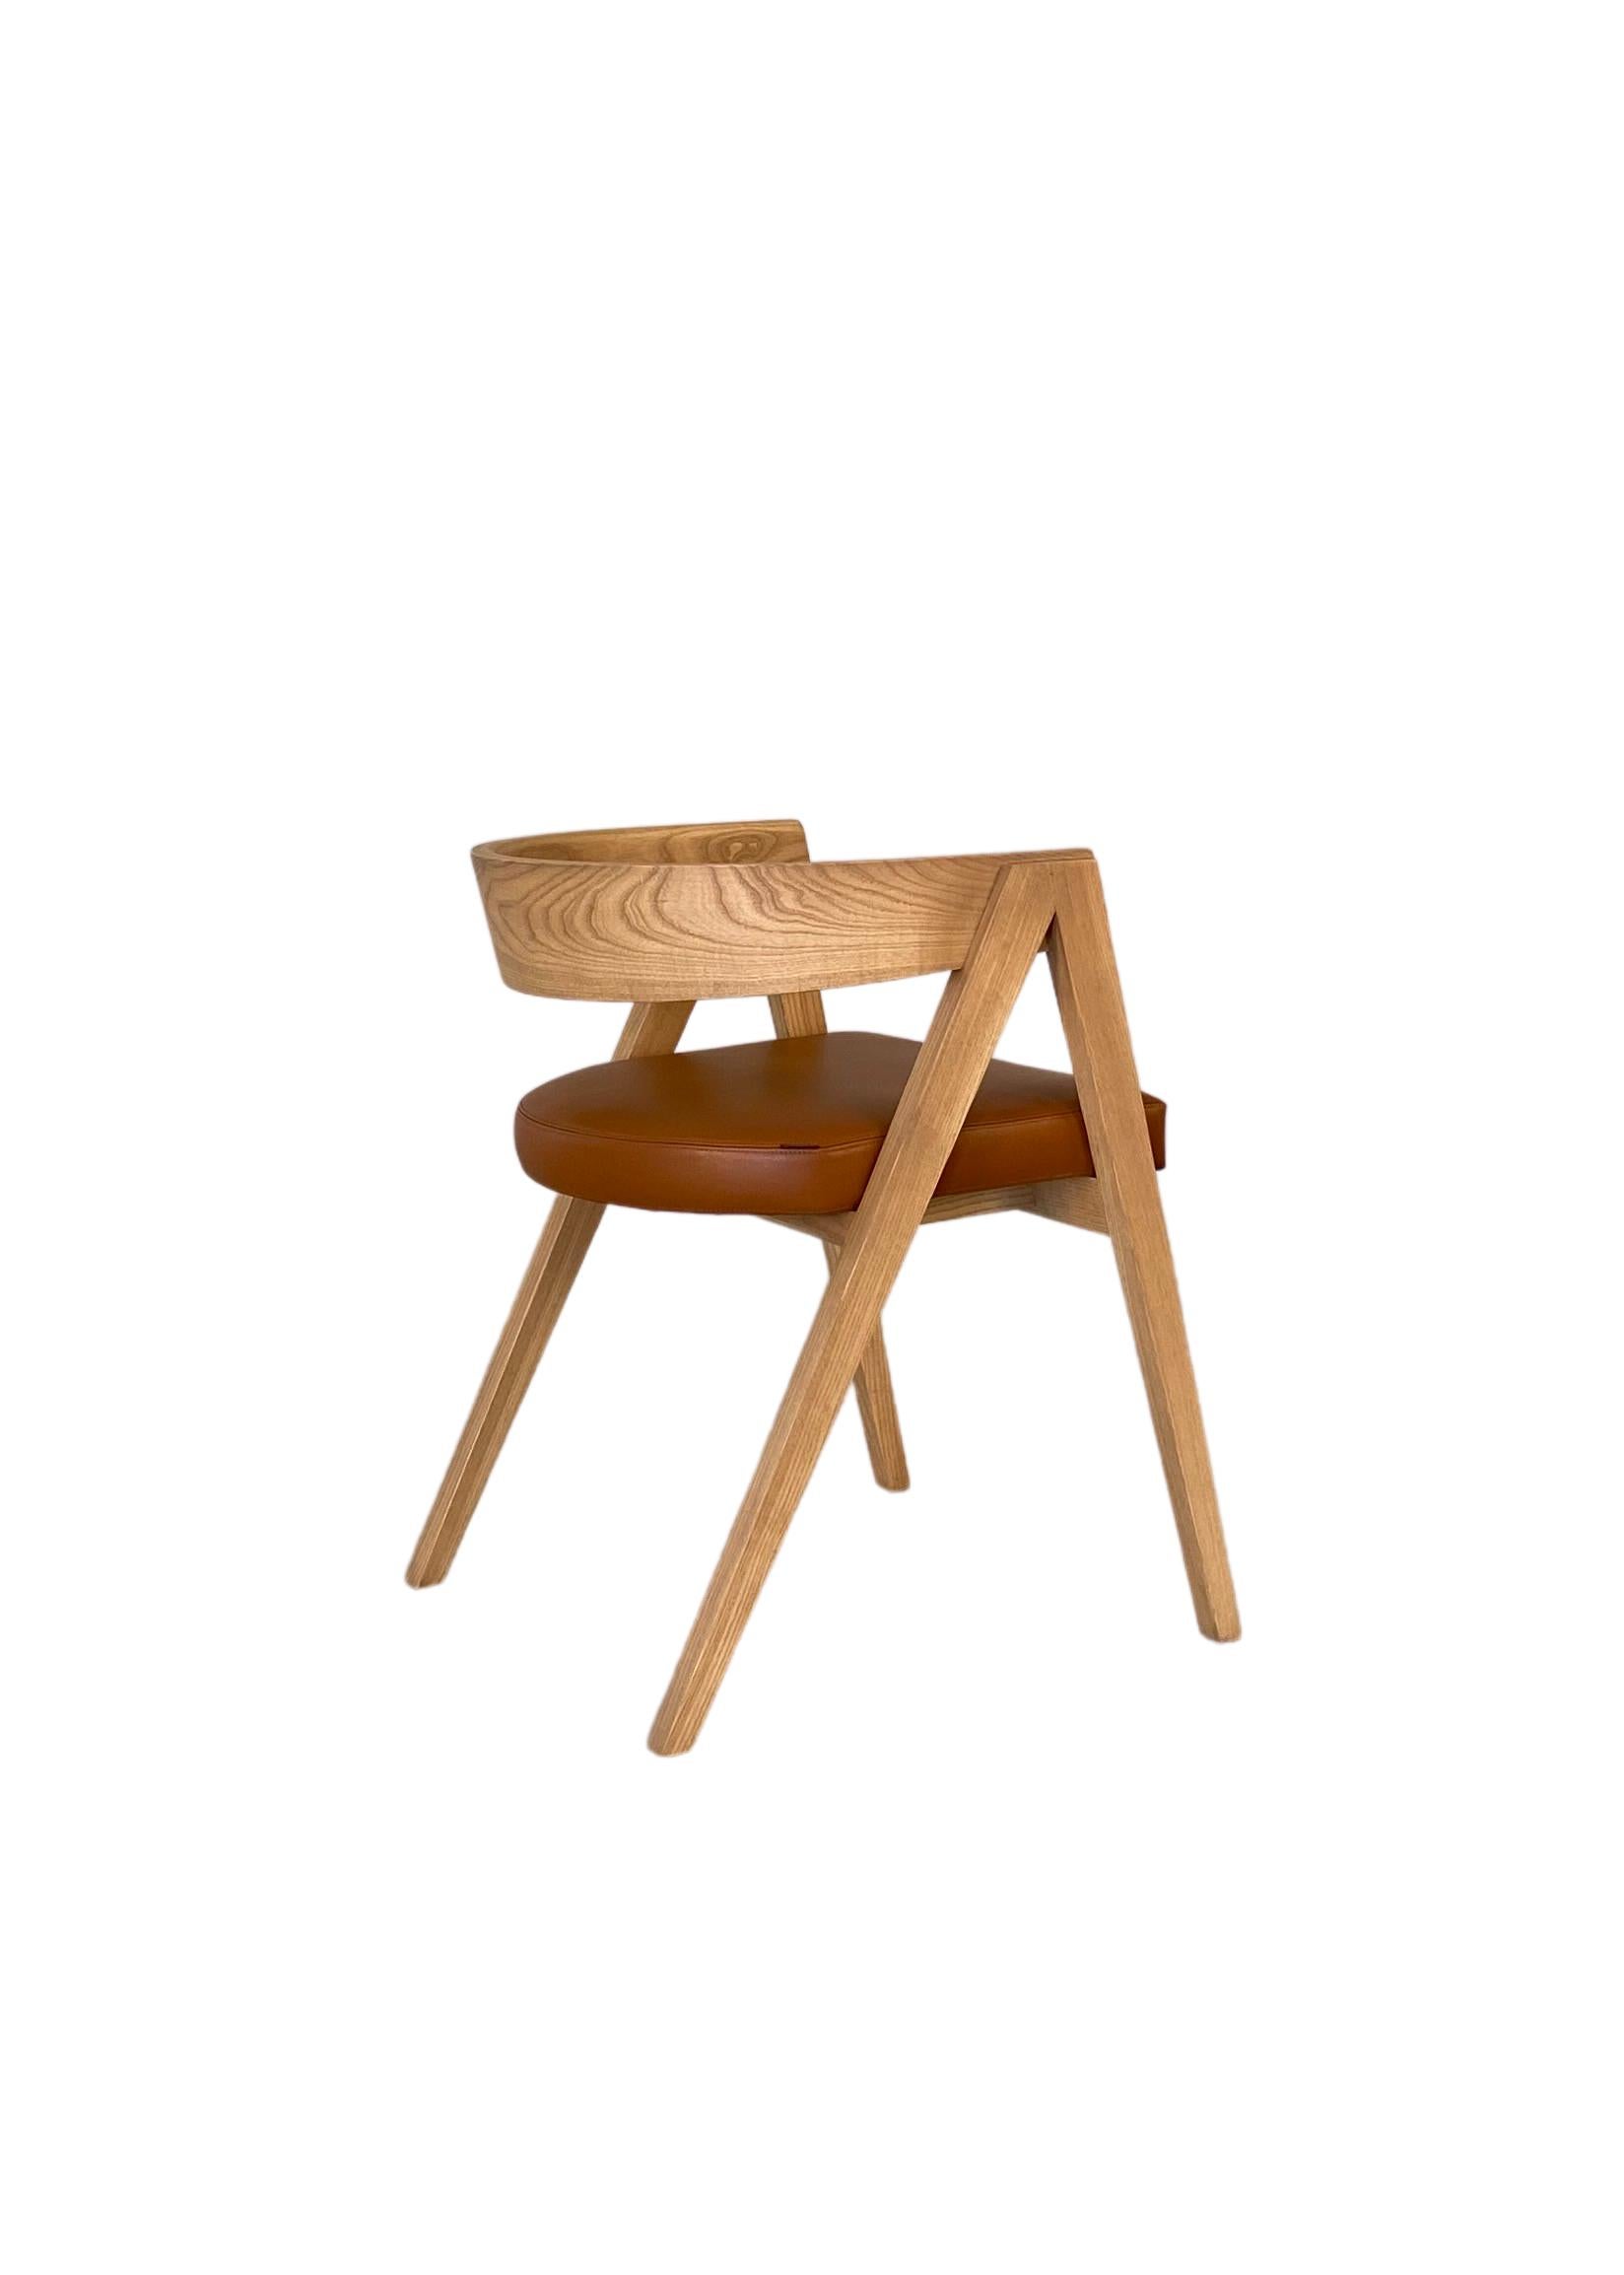 Cooper, Armchair Made of ash wood with Curved Backrest, by Morelato 1